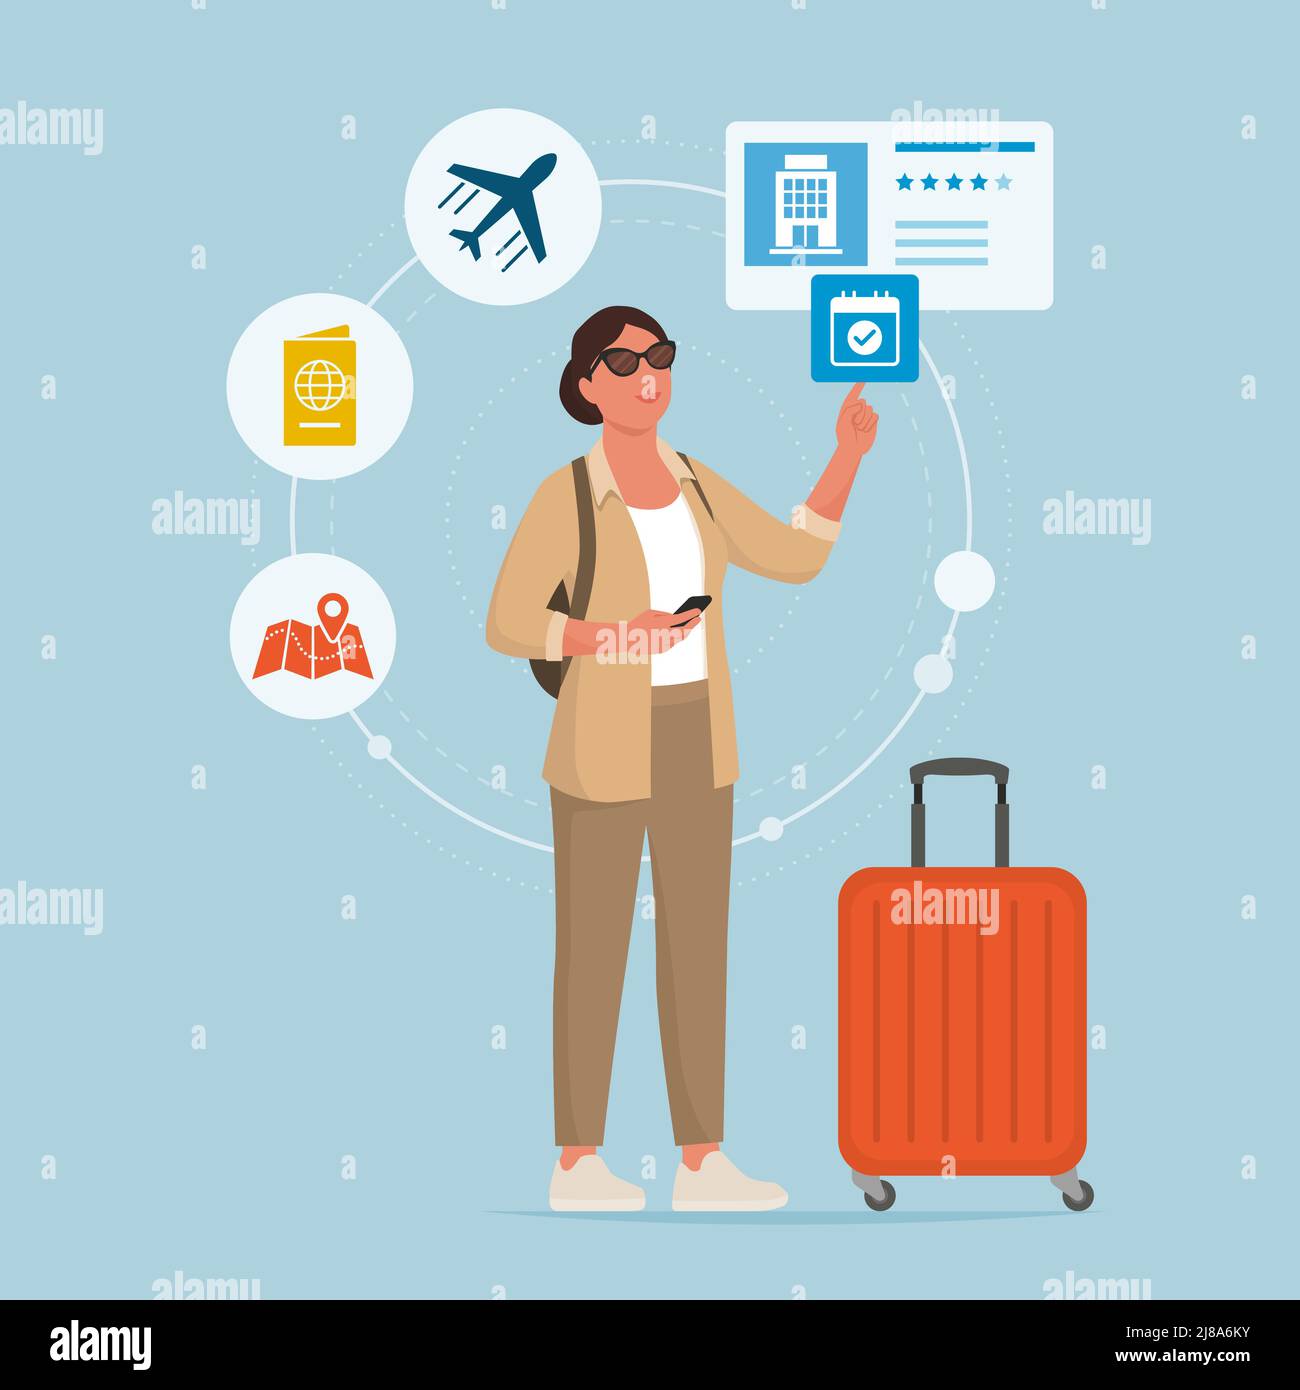 Tourist woman traveling alone and using online travel service apps, she is booking a hotel room Stock Vector